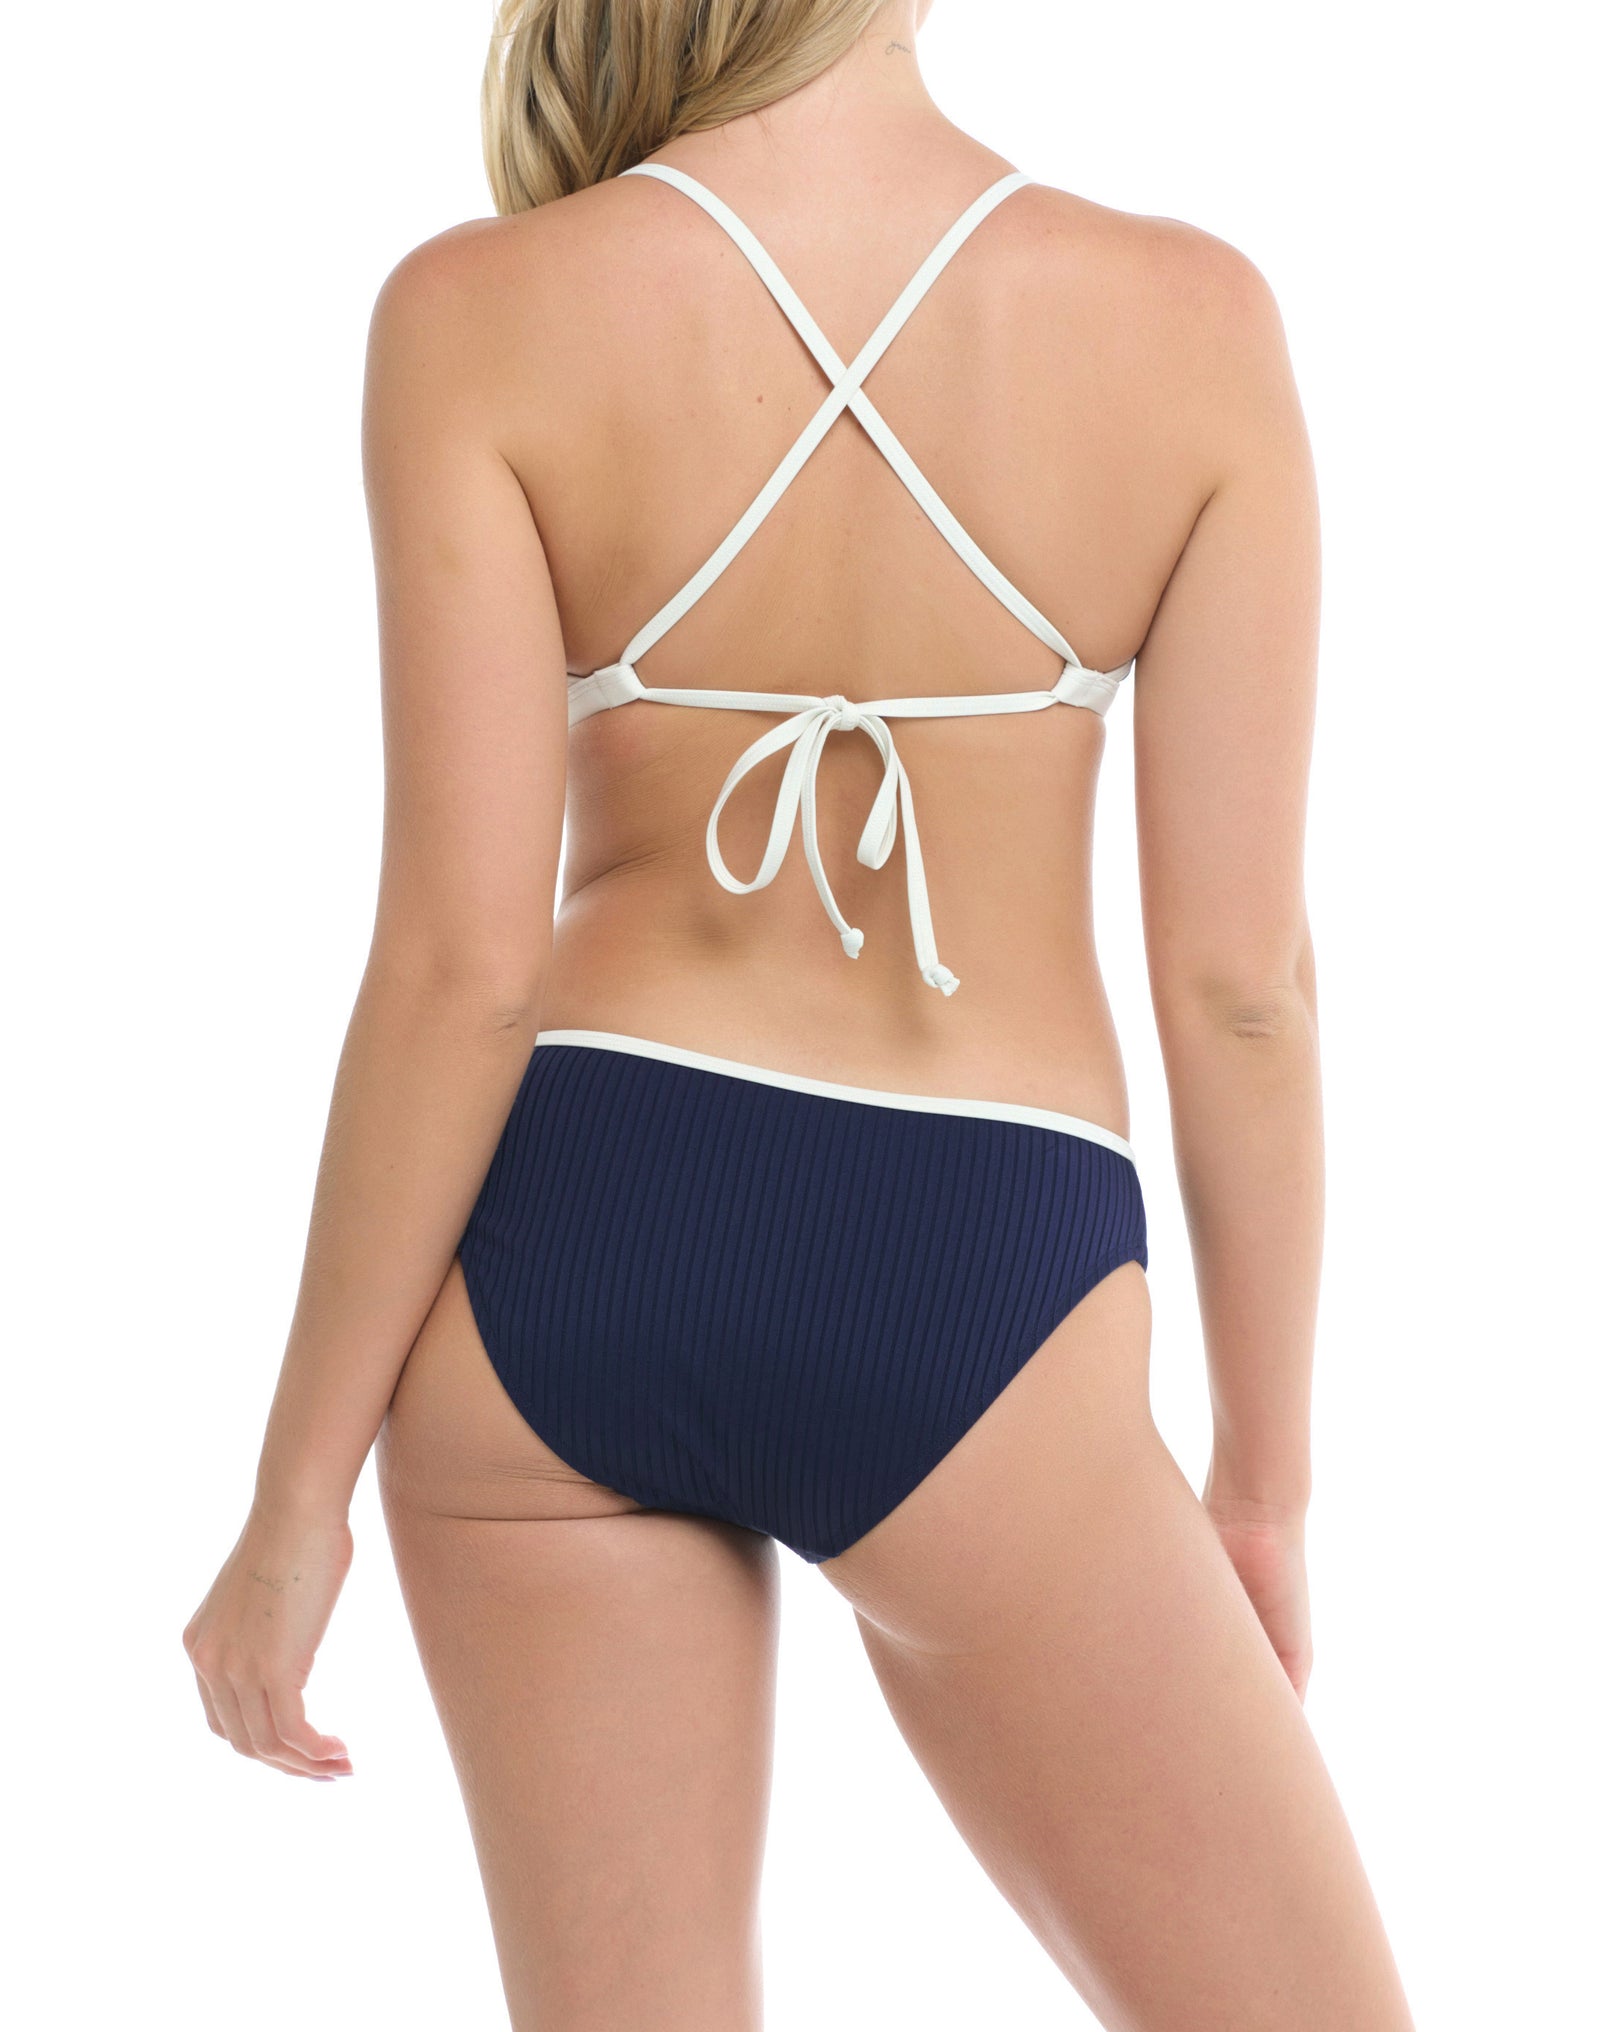 MAU LOA COLLECTION: JAYME  Fixed Triangle Top  Removable Soft Cups, Ribbed Fabric, Adjustable Straps, 2-Way Tie Back  Product#: SK736119